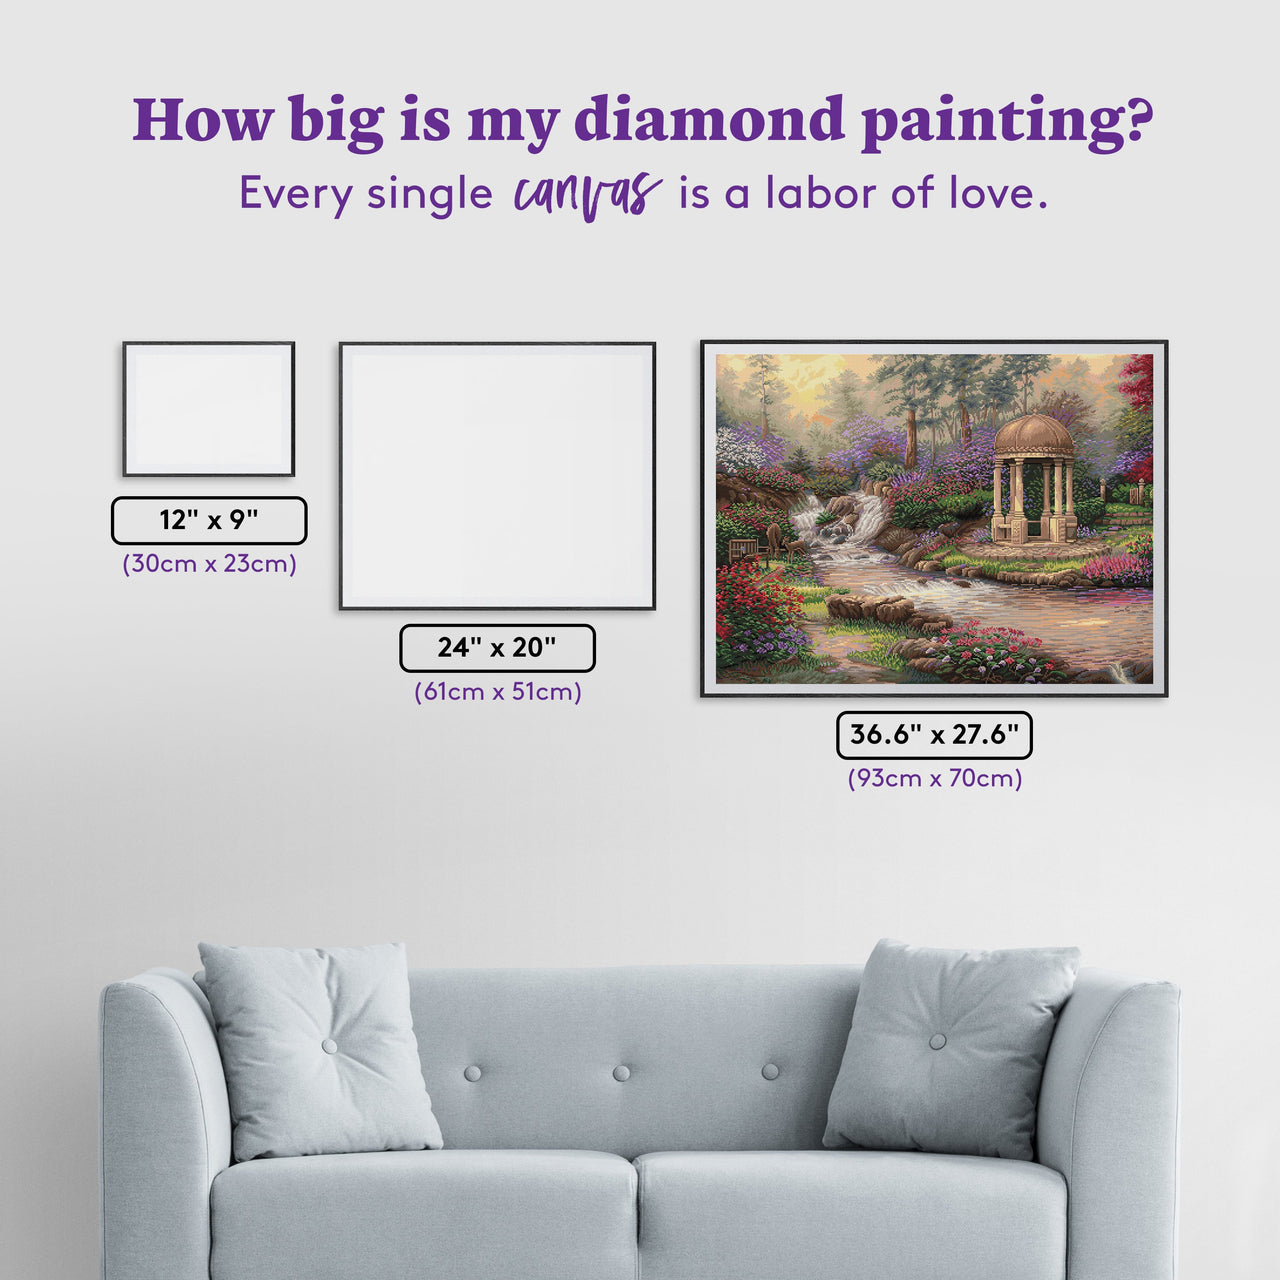 Diamond Painting Love's Infinity Garden 36.6" x 27.6" (93cm x 70cm) / Square with 56 Colors including 5 ABs and 1 Fairy Dust Diamond / 104,813